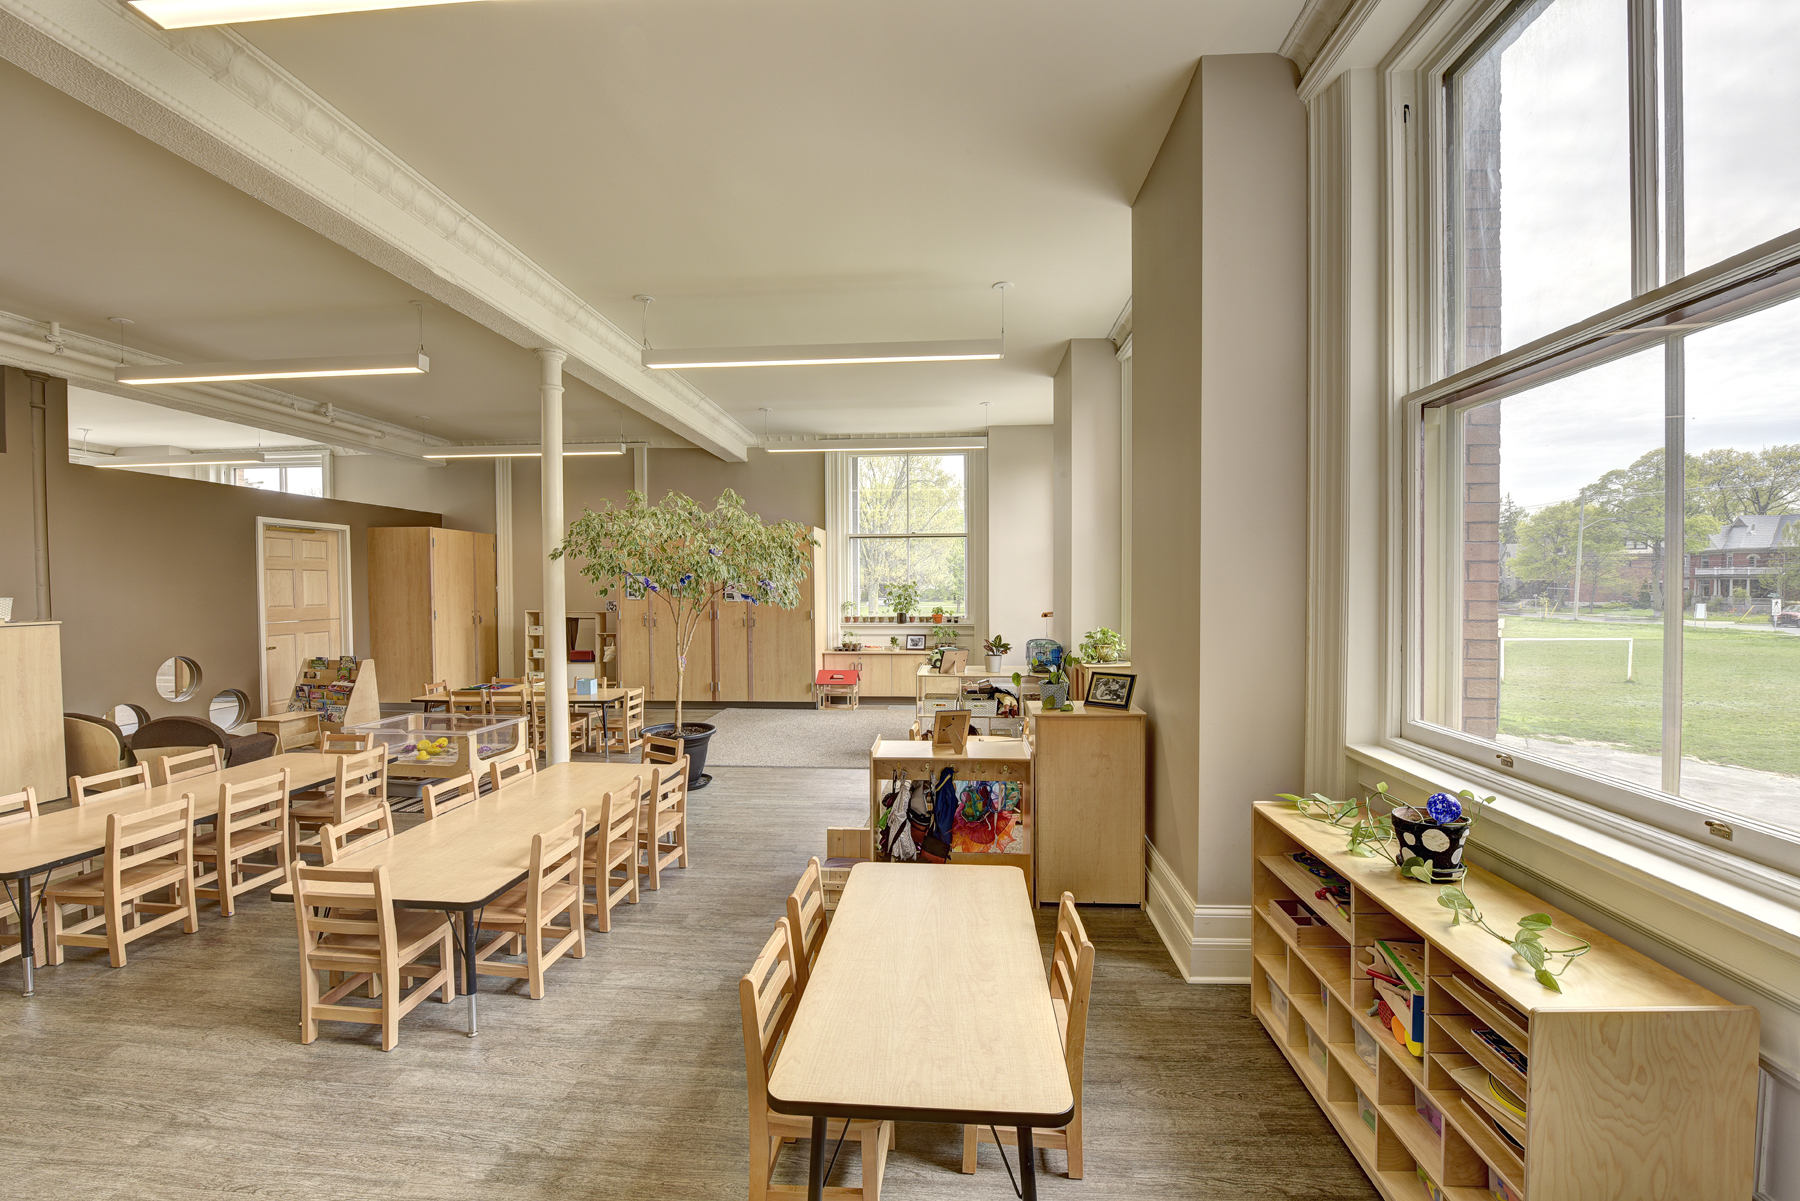 Children's classroom with long wooden tables and chairs, bookshelves, storage cupboards and large bright windows